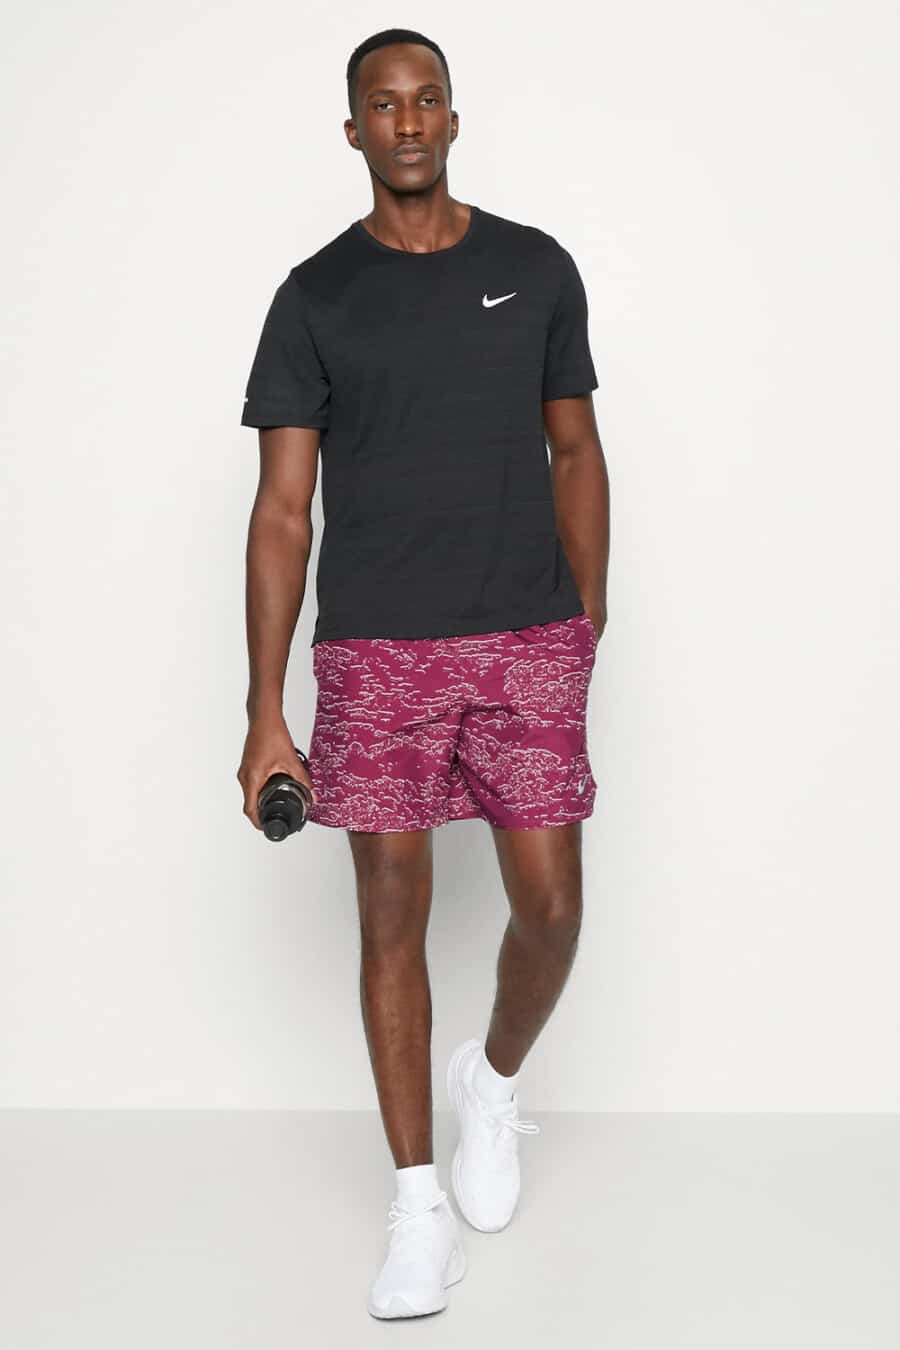 Men's patterned pink shorts, black Nike T-shirt, white socks and white running sneakers outfit